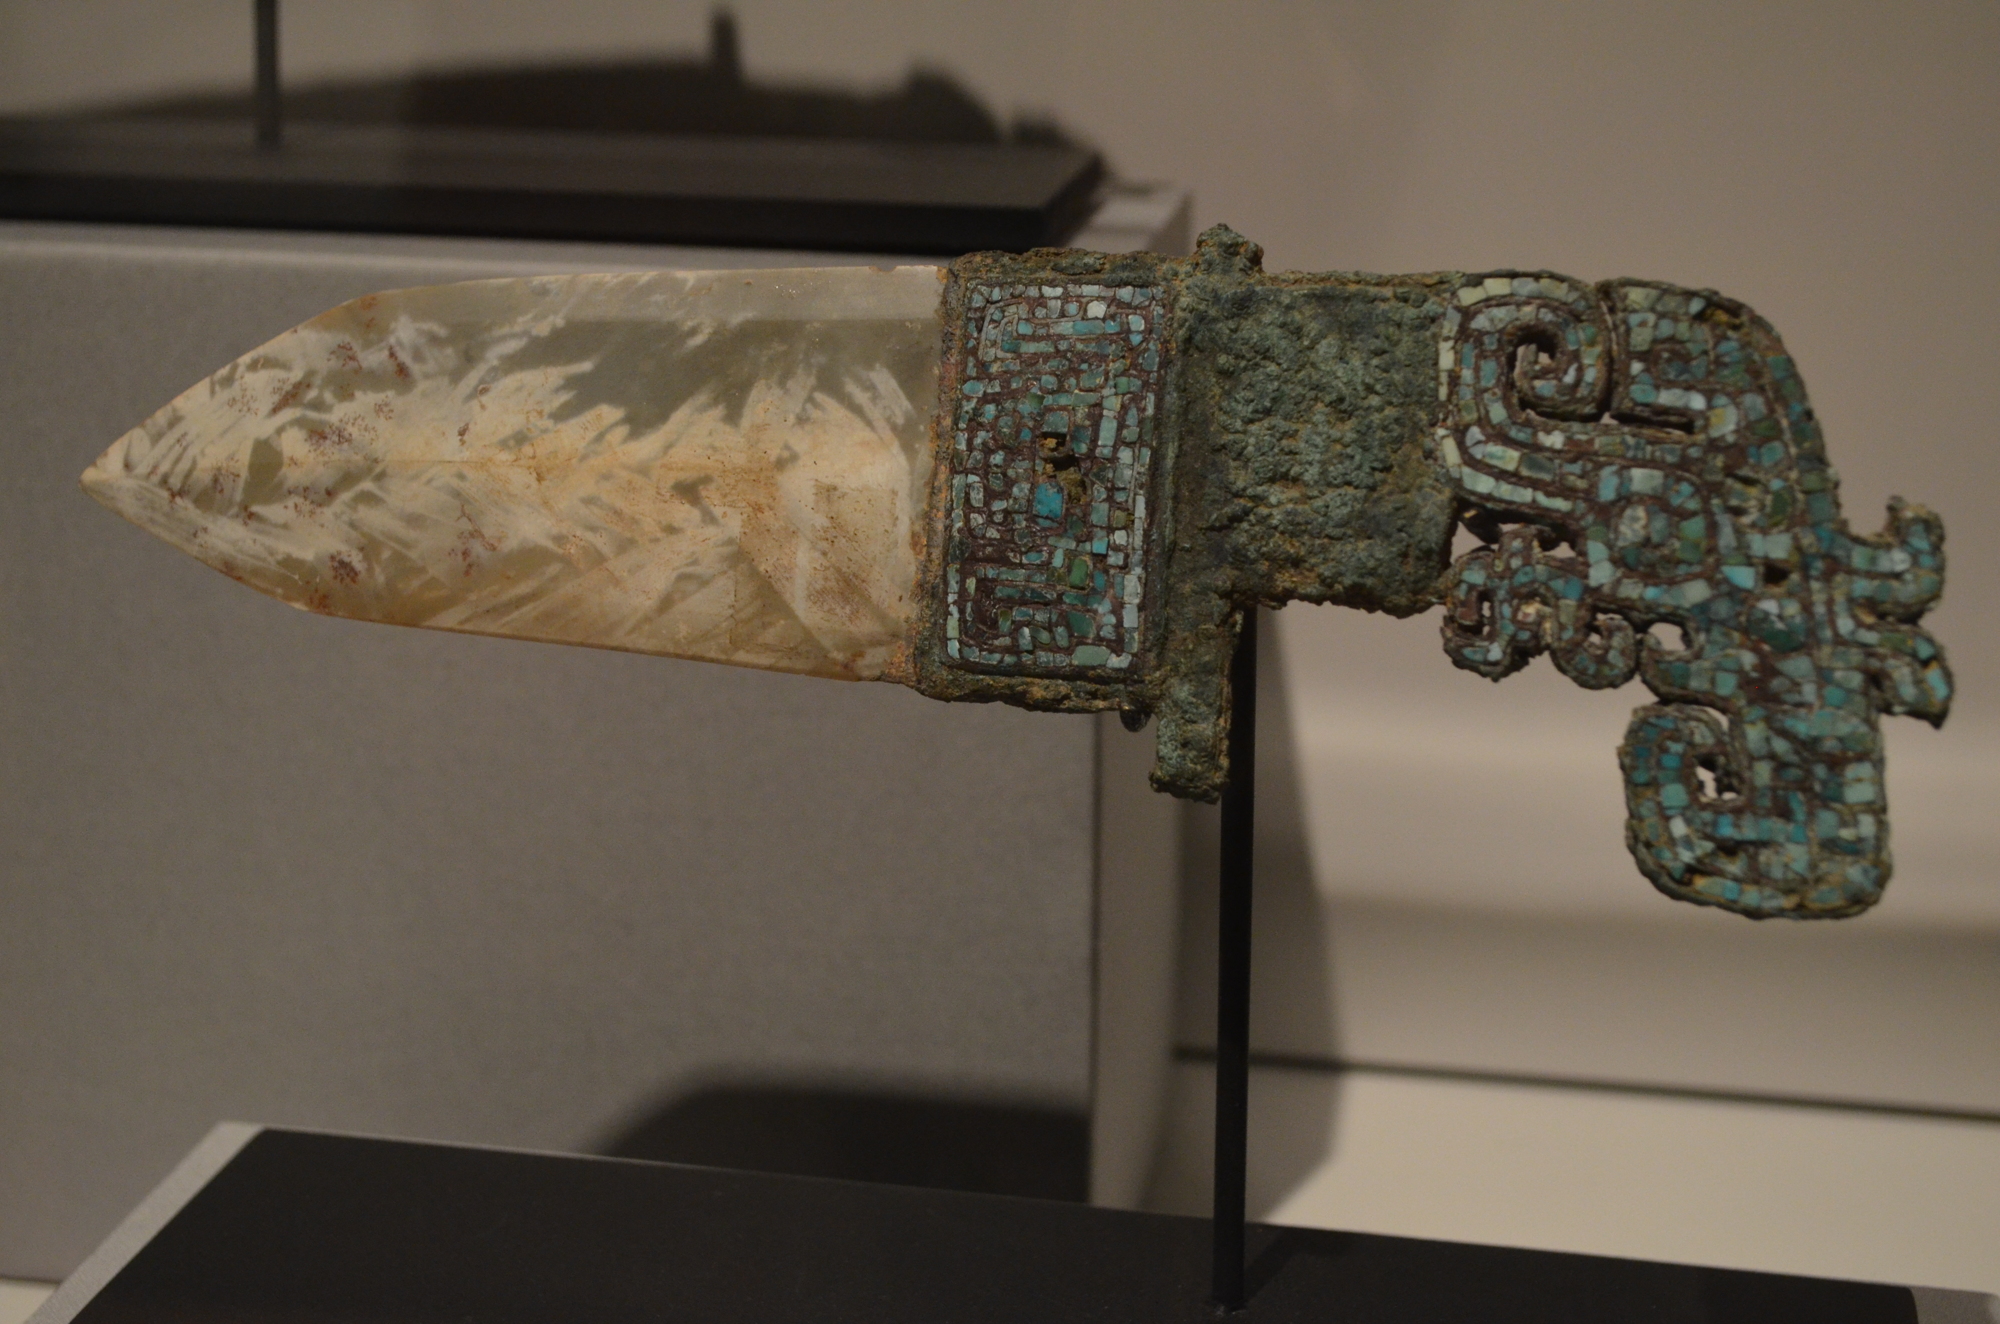 Bronze and jade weaponry, like this dagger, was ceremonial and not used in battle.